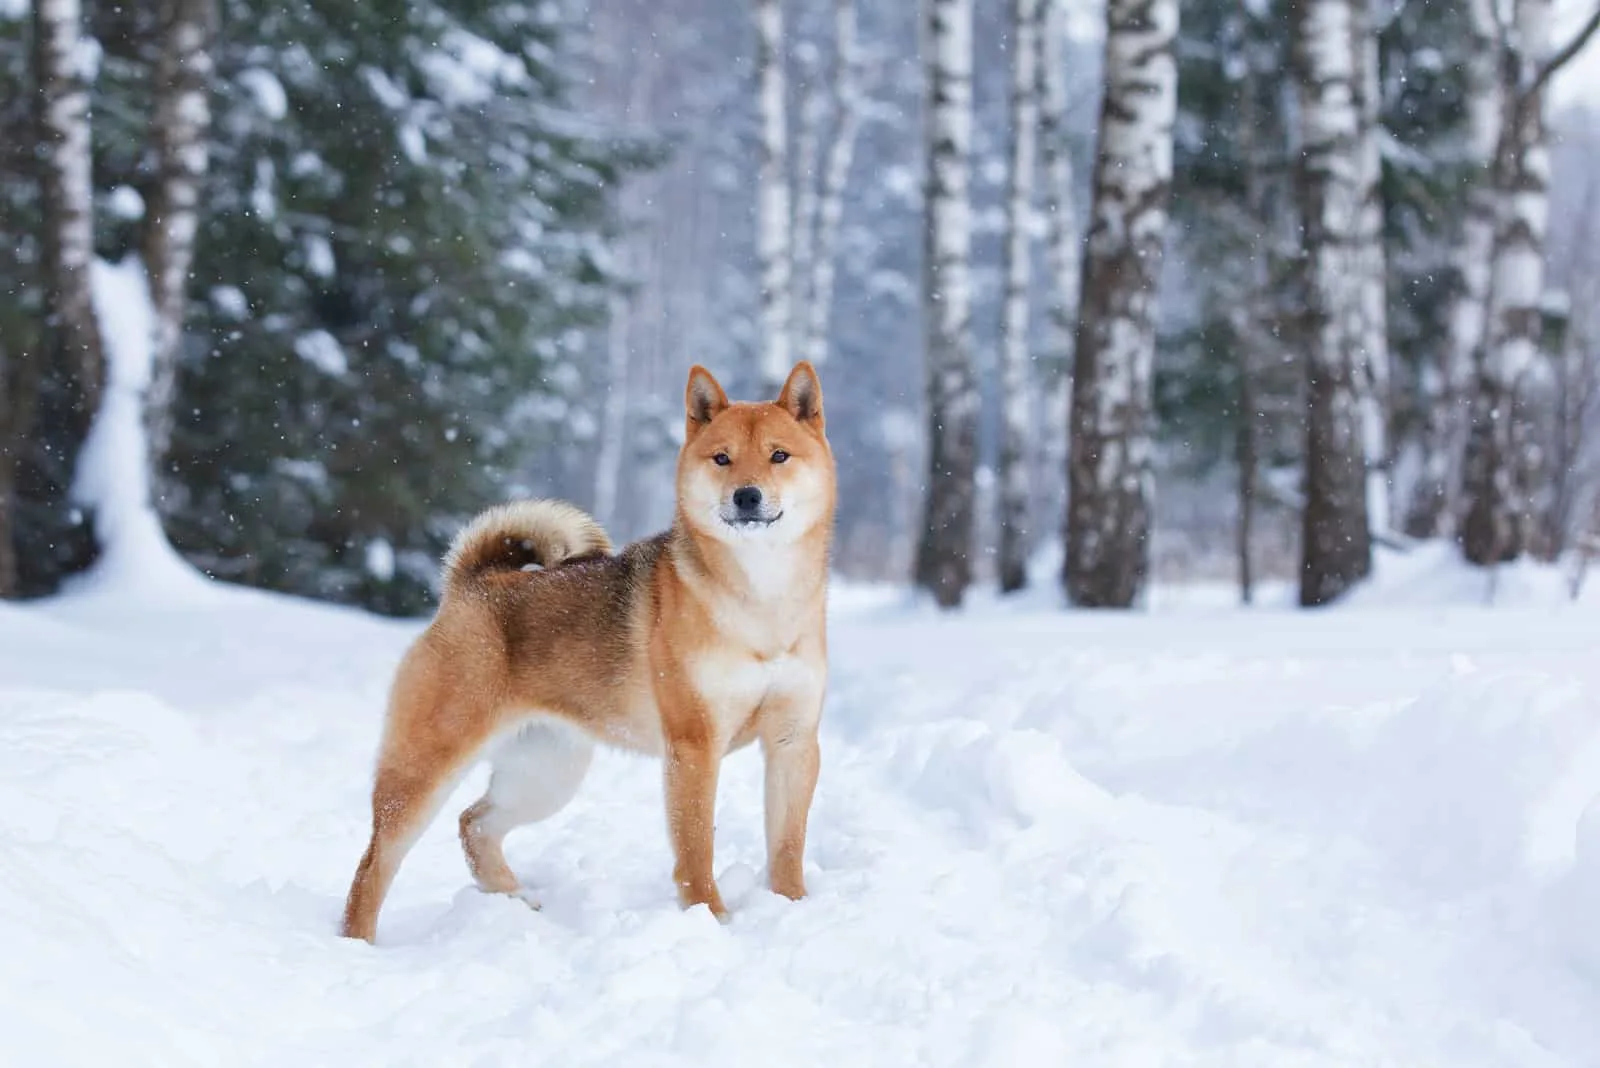 shiba inu dog in winter snow forest